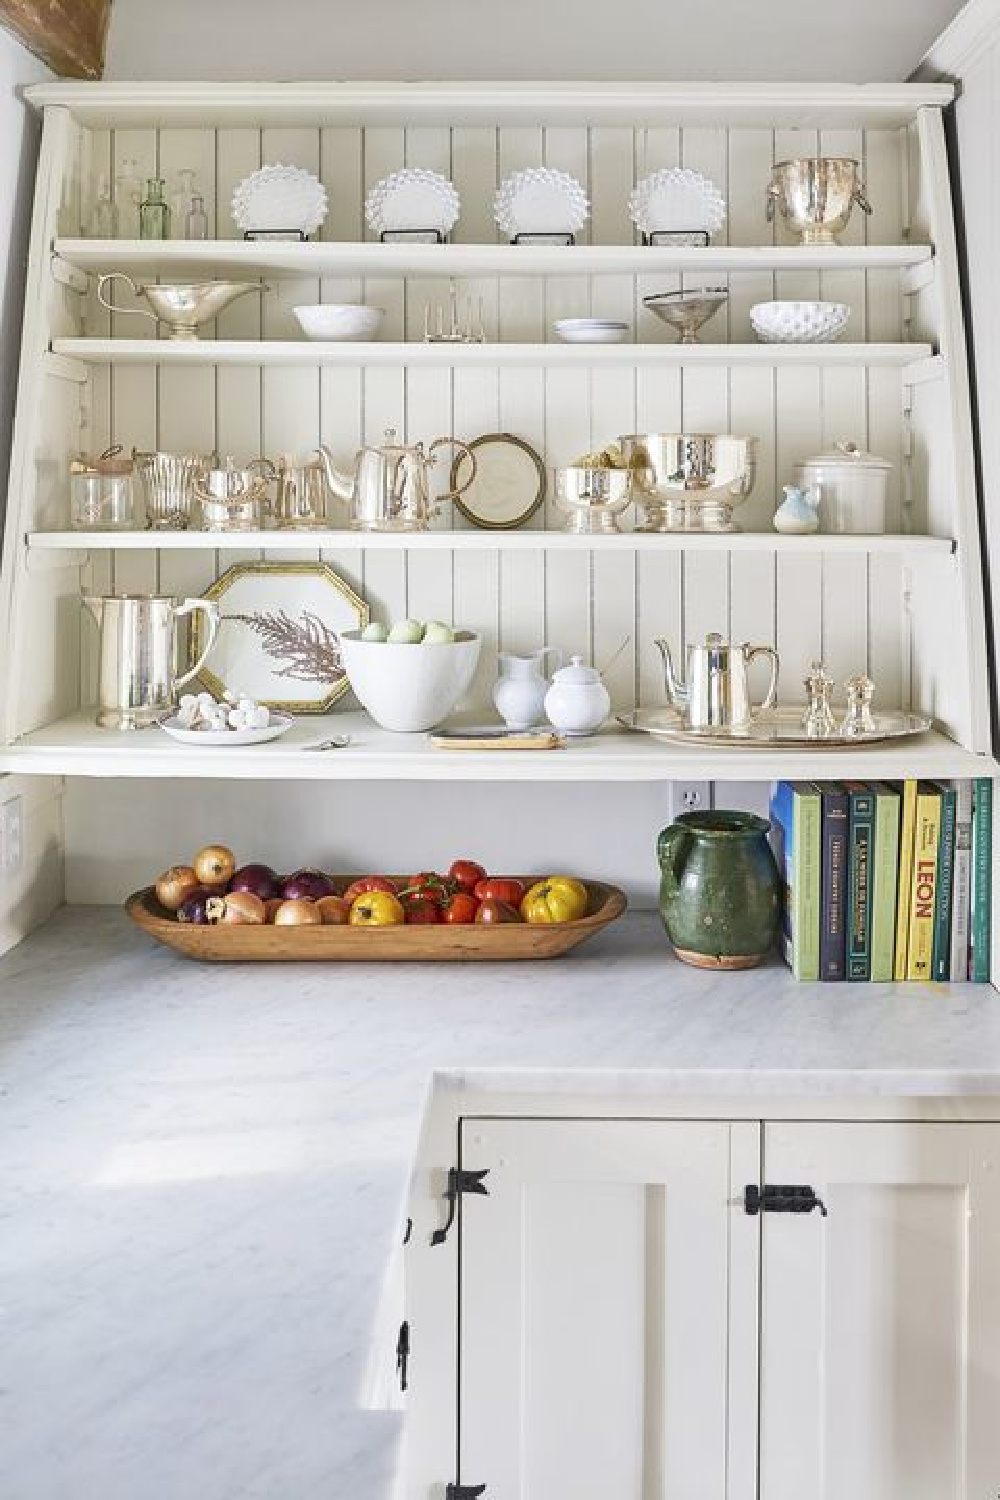 Classic white country kitchen in a New England farmhouse by OKL in Country Living.